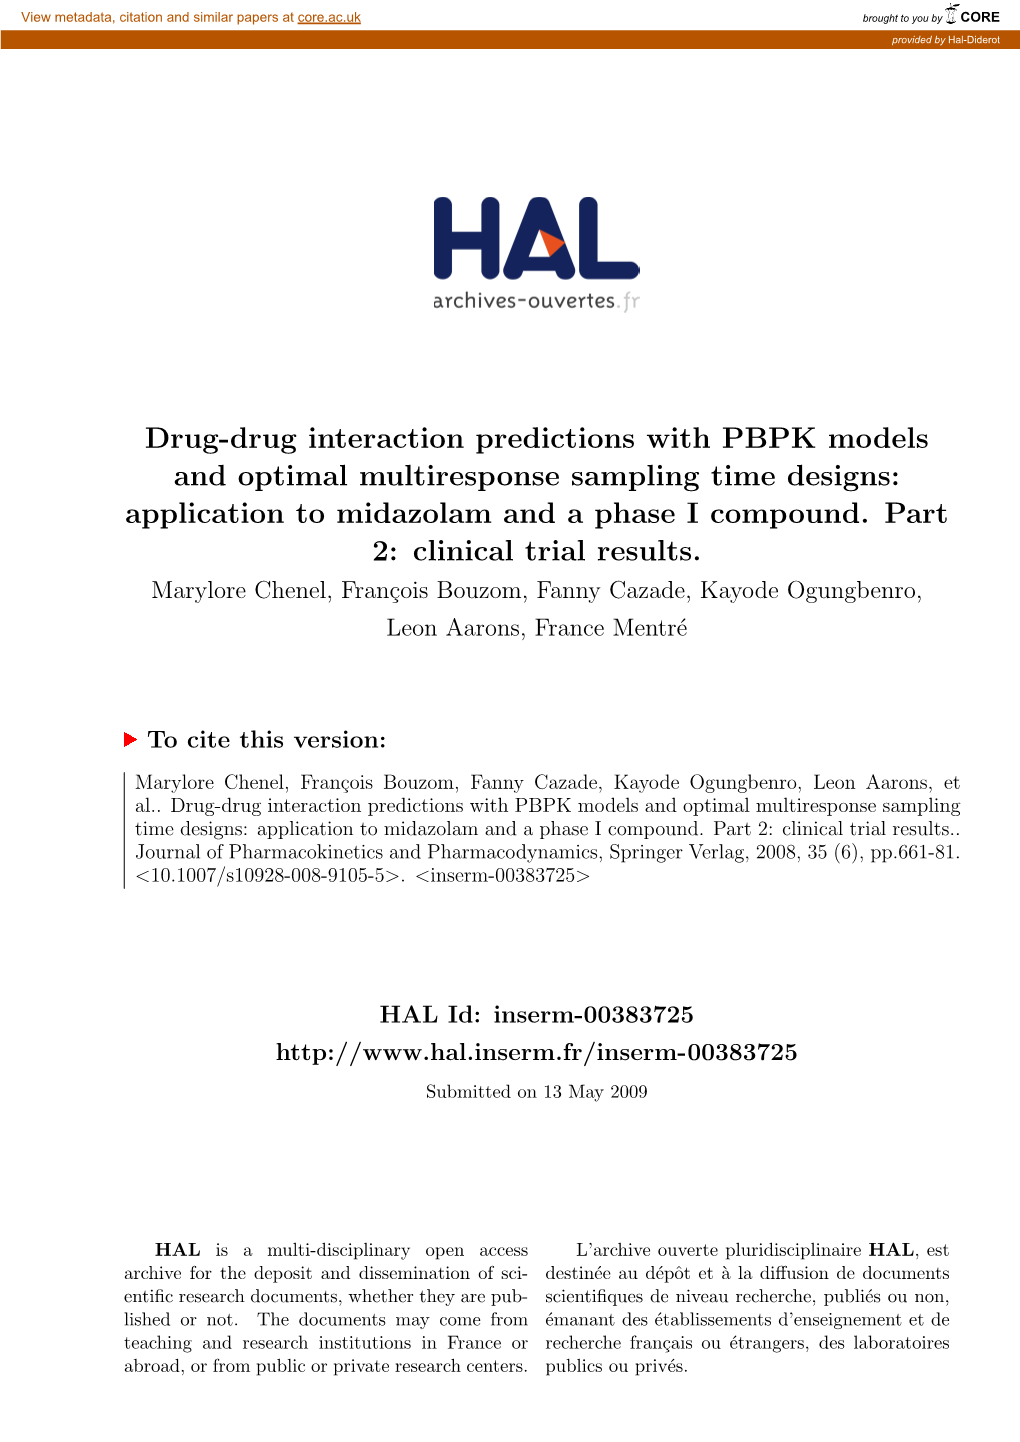 Drug-Drug Interaction Predictions with PBPK Models and Optimal Multiresponse Sampling Time Designs: Application to Midazolam and a Phase I Compound